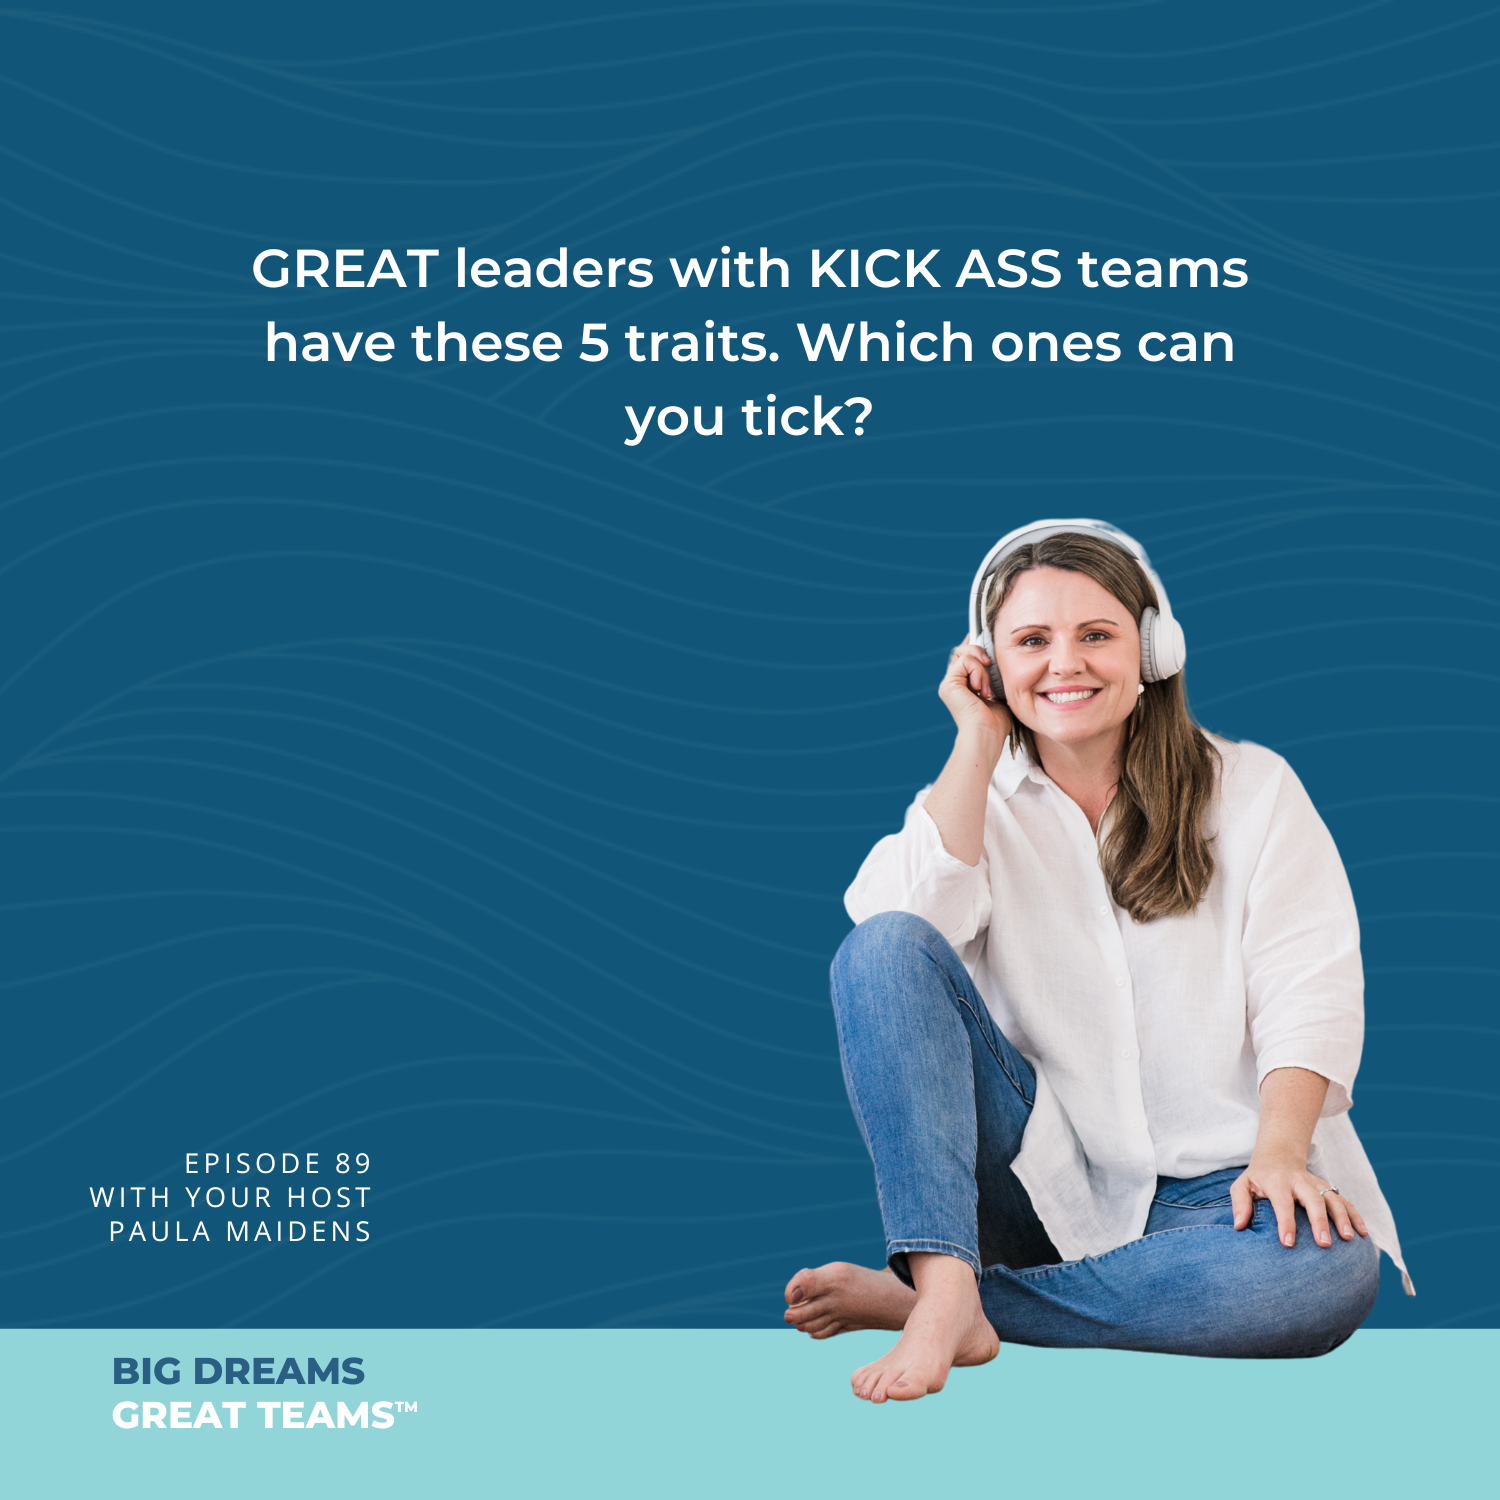 GREAT leaders with KICK ASS teams have these 5 traits. Which ones can you tick?